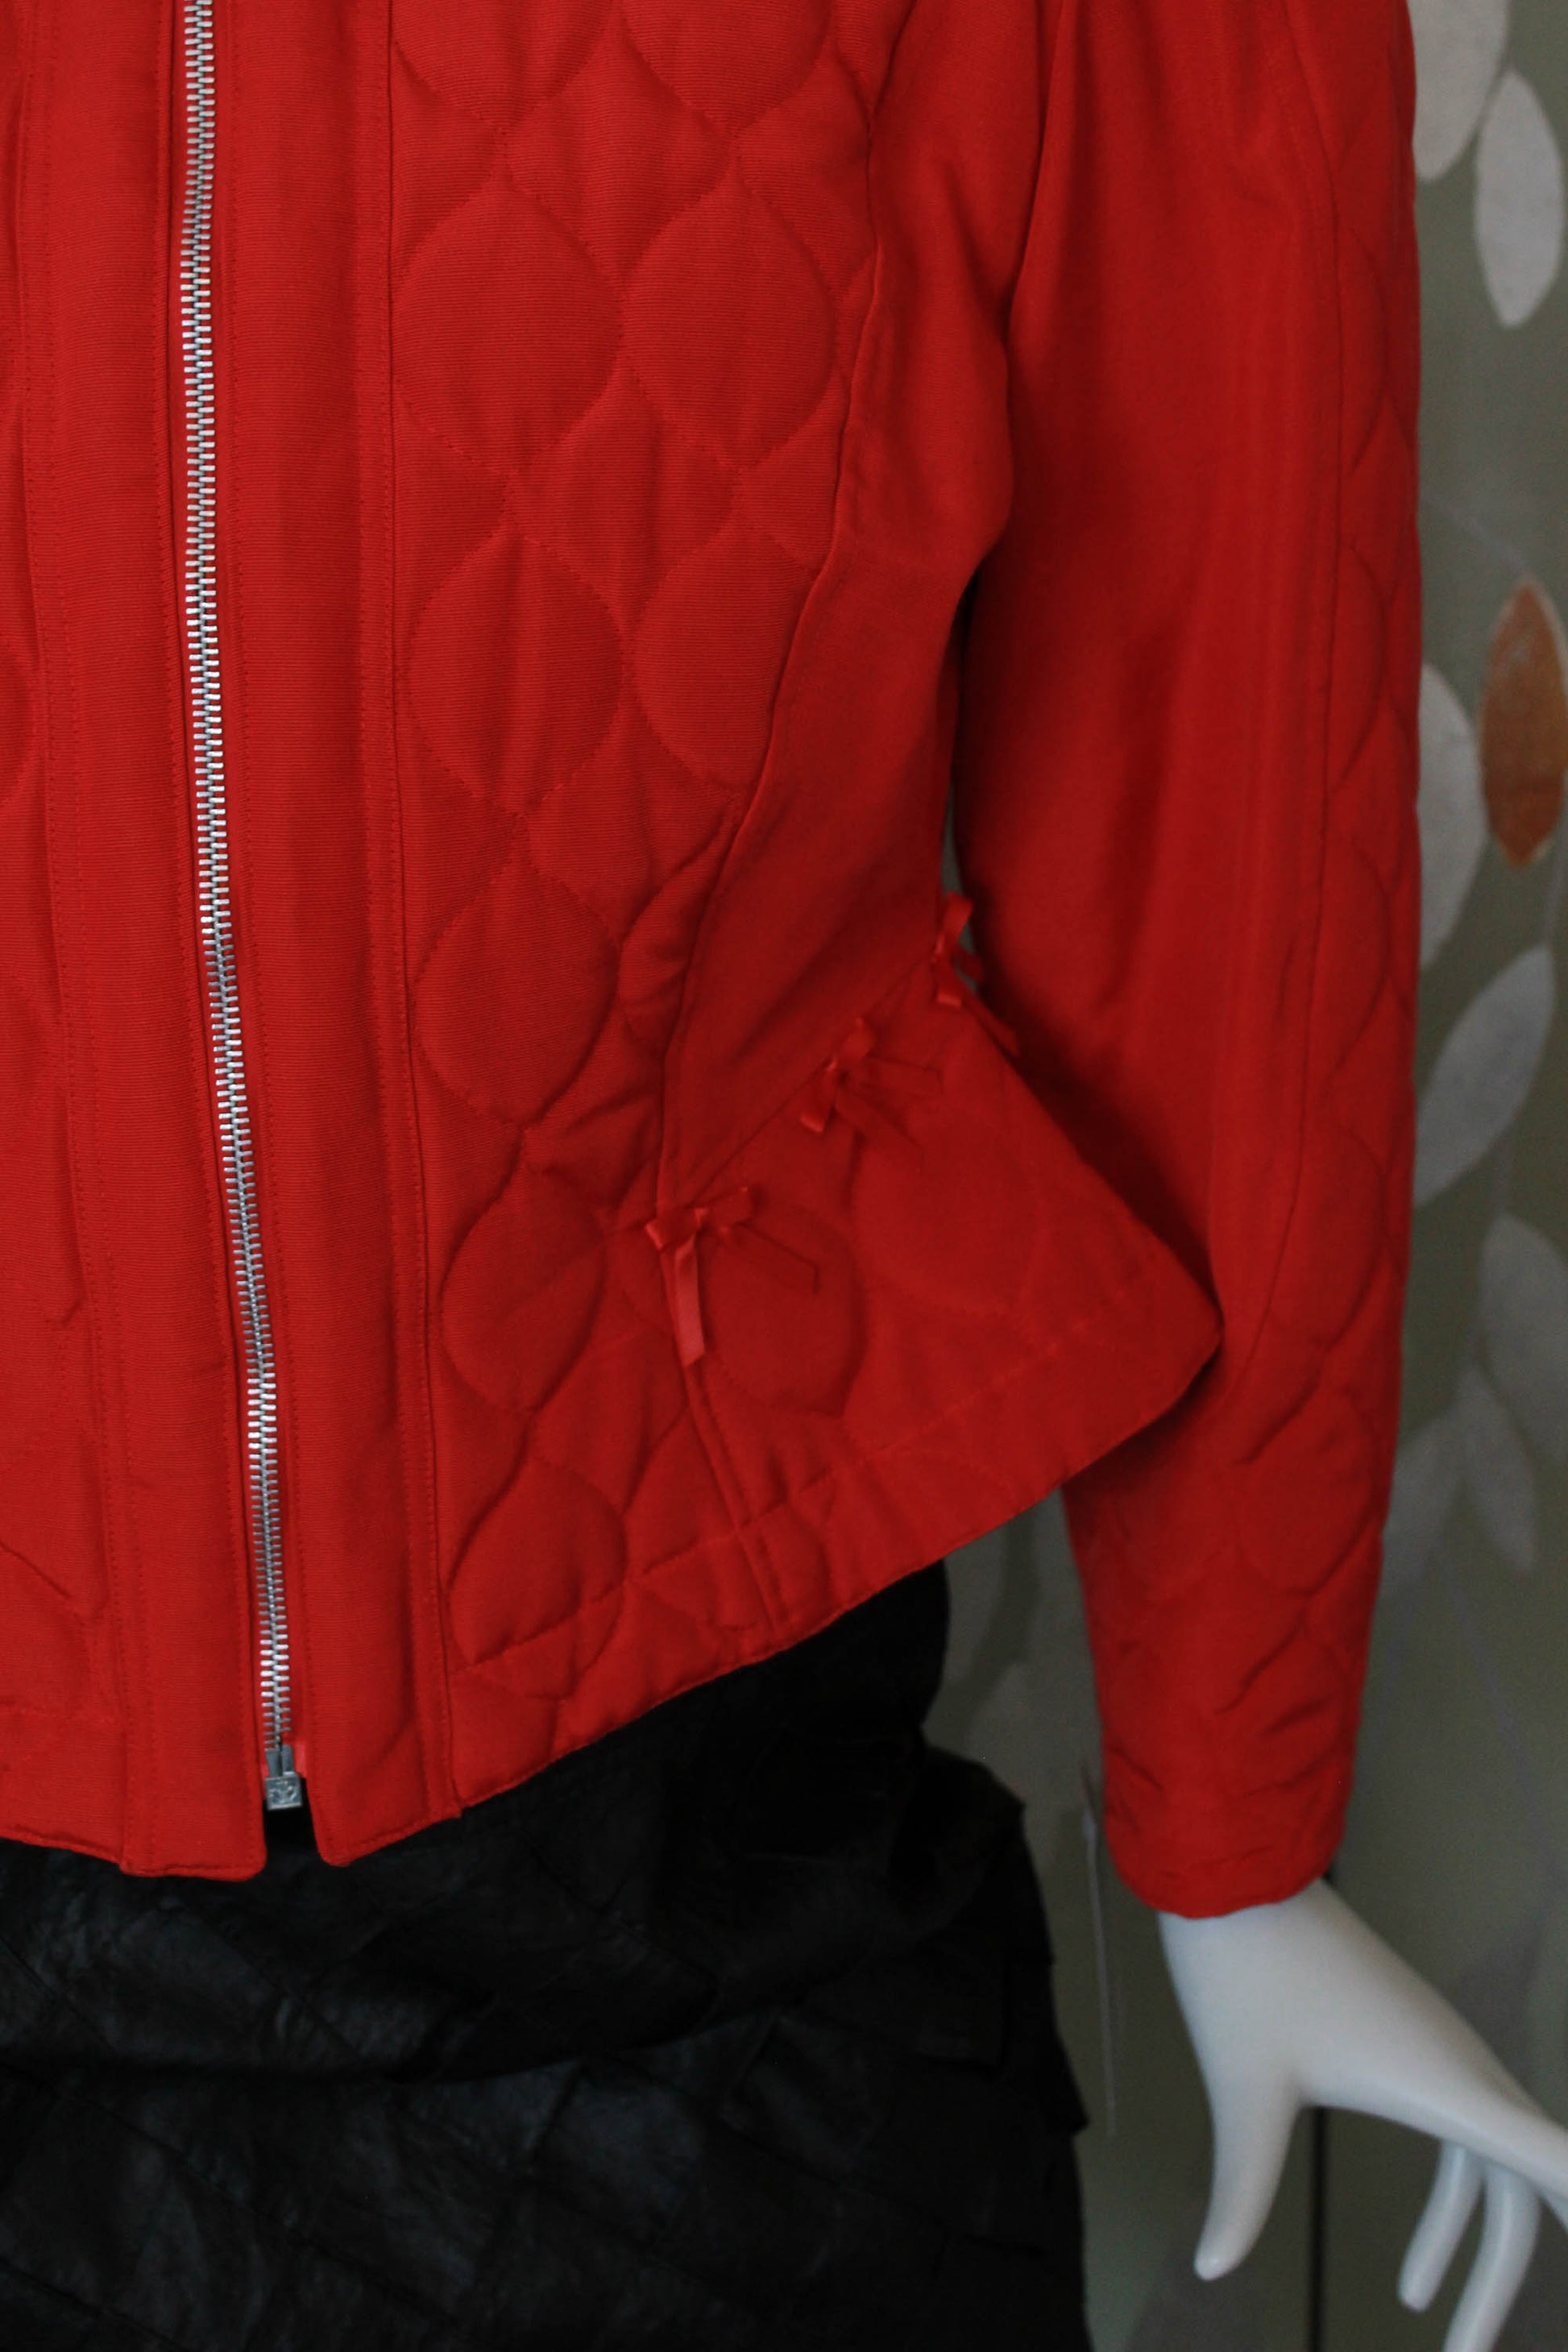 80s red quilted jacket with bows at waist coquette aesthetic roman price vintage